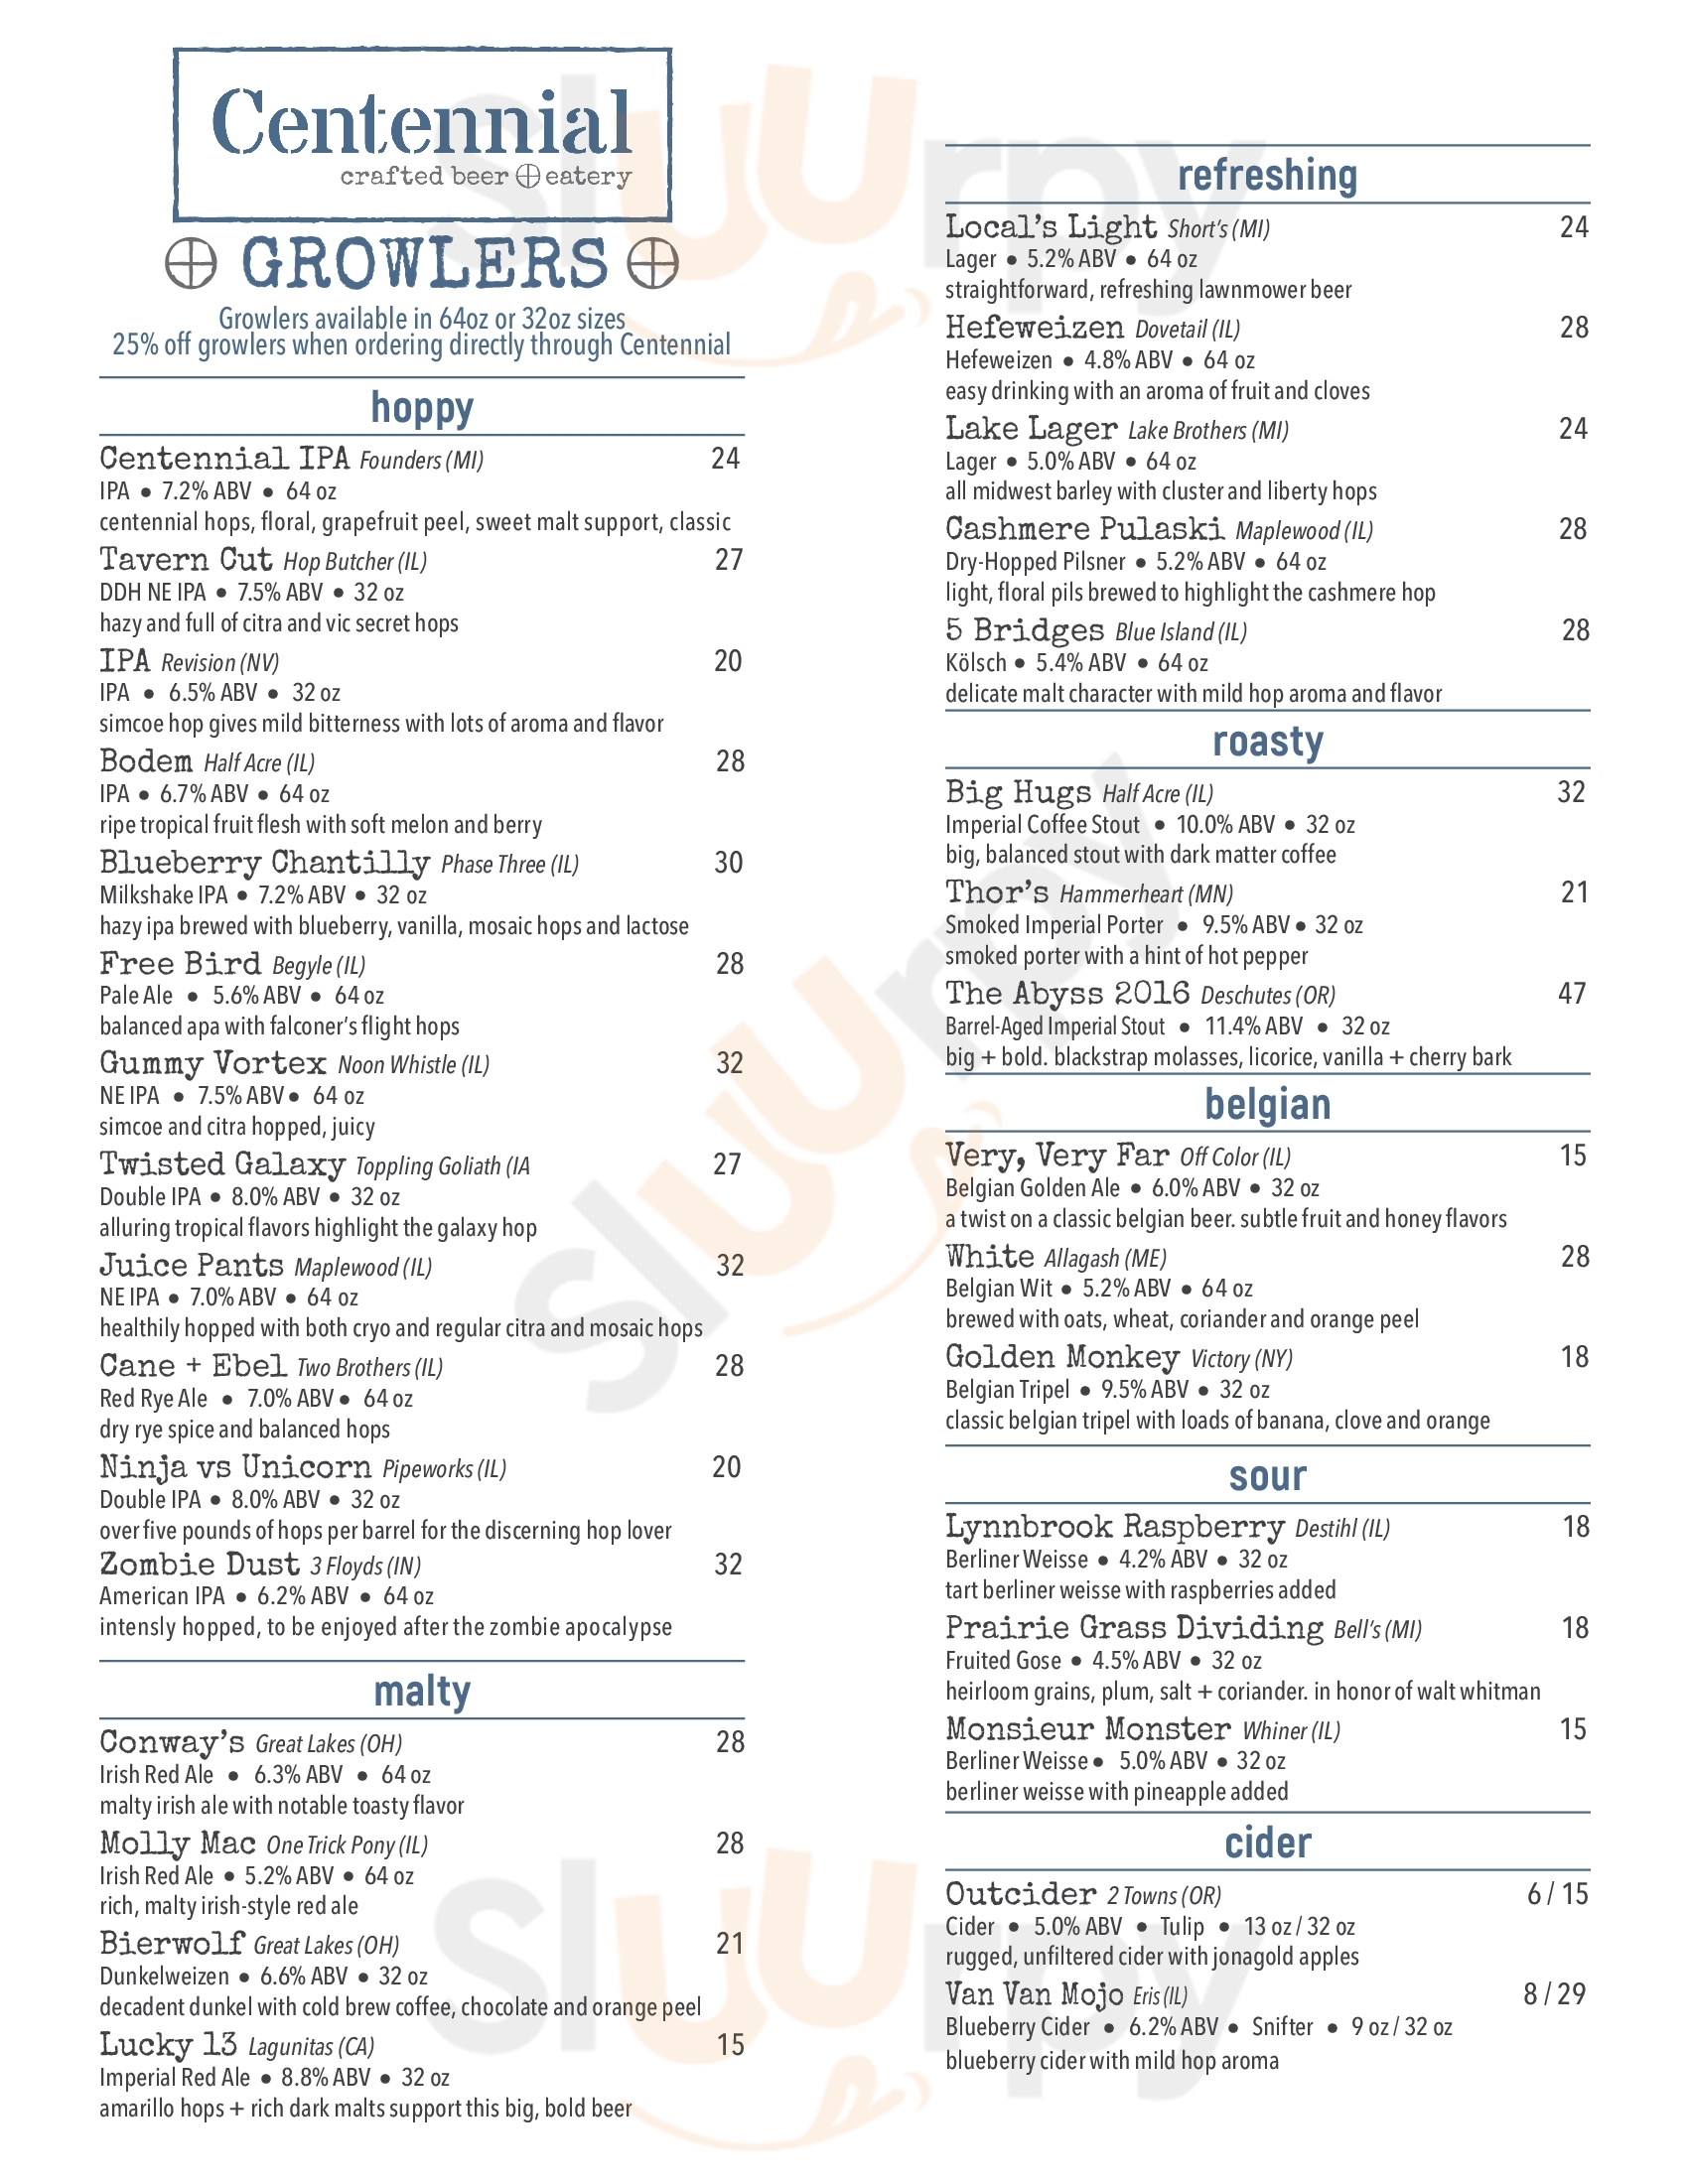 Centennial Crafted Beer & Eatery Chicago Menu - 1